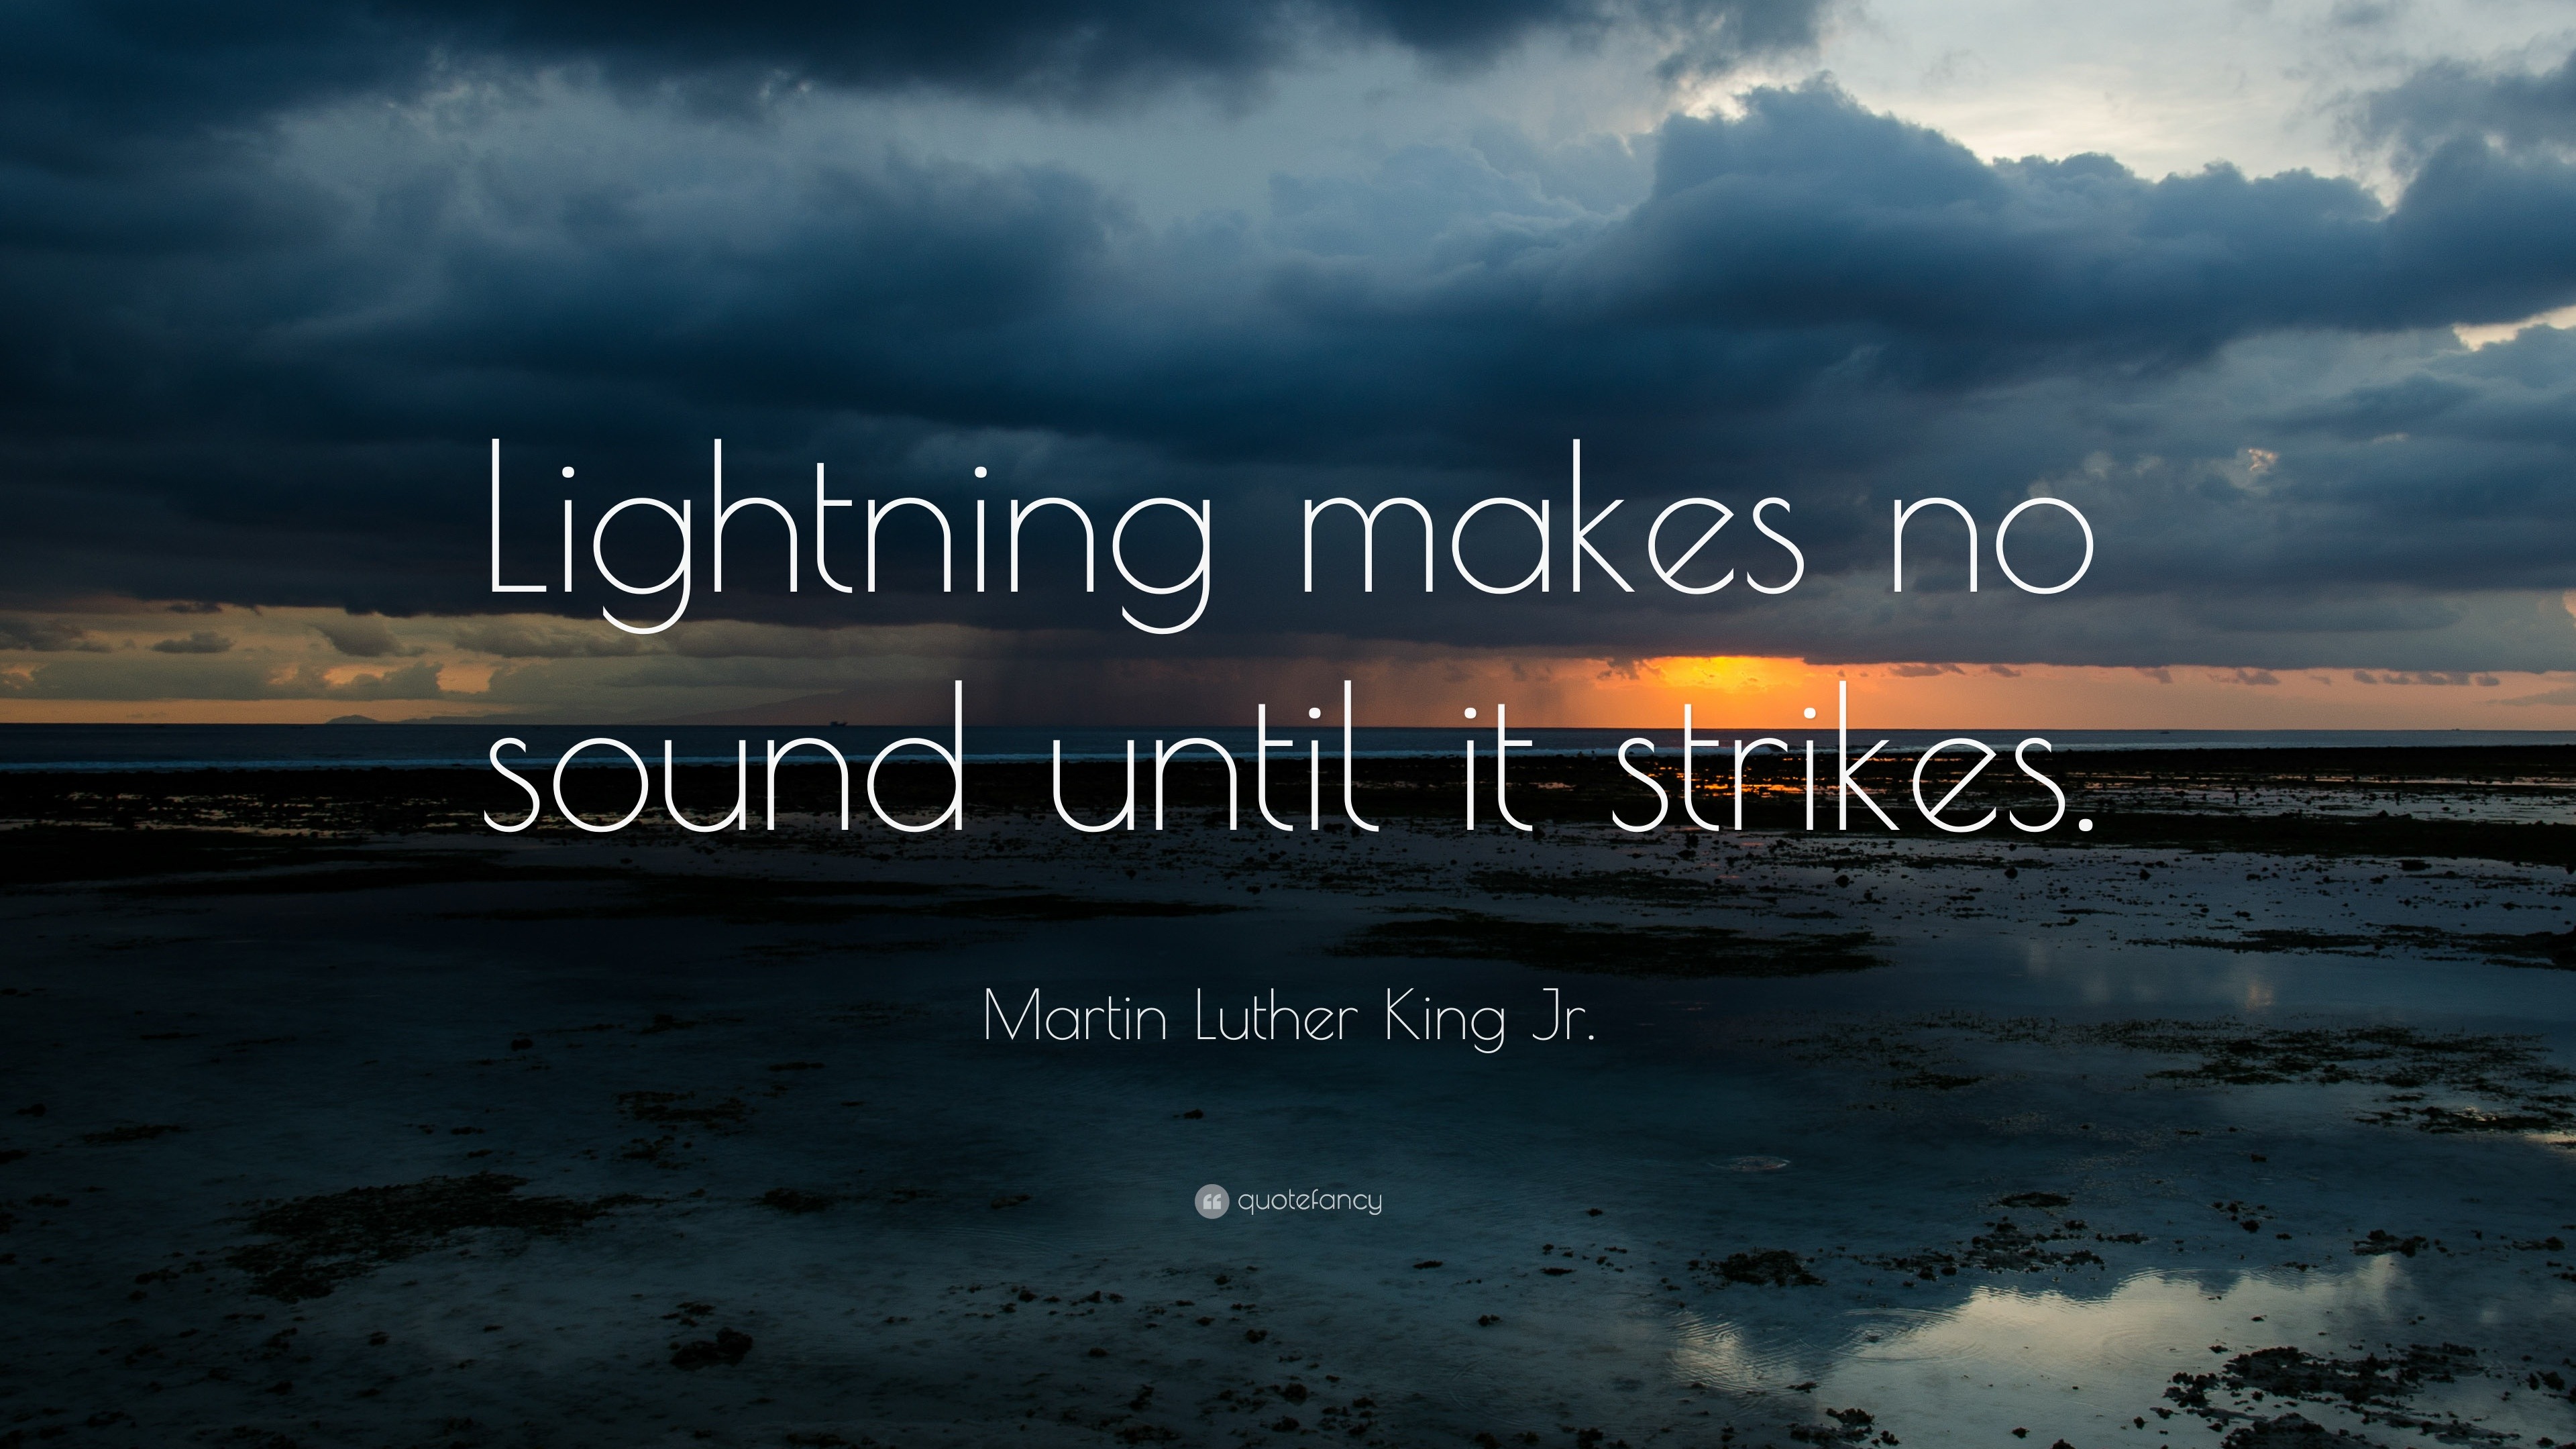 Martin Luther King Jr. Quote: 